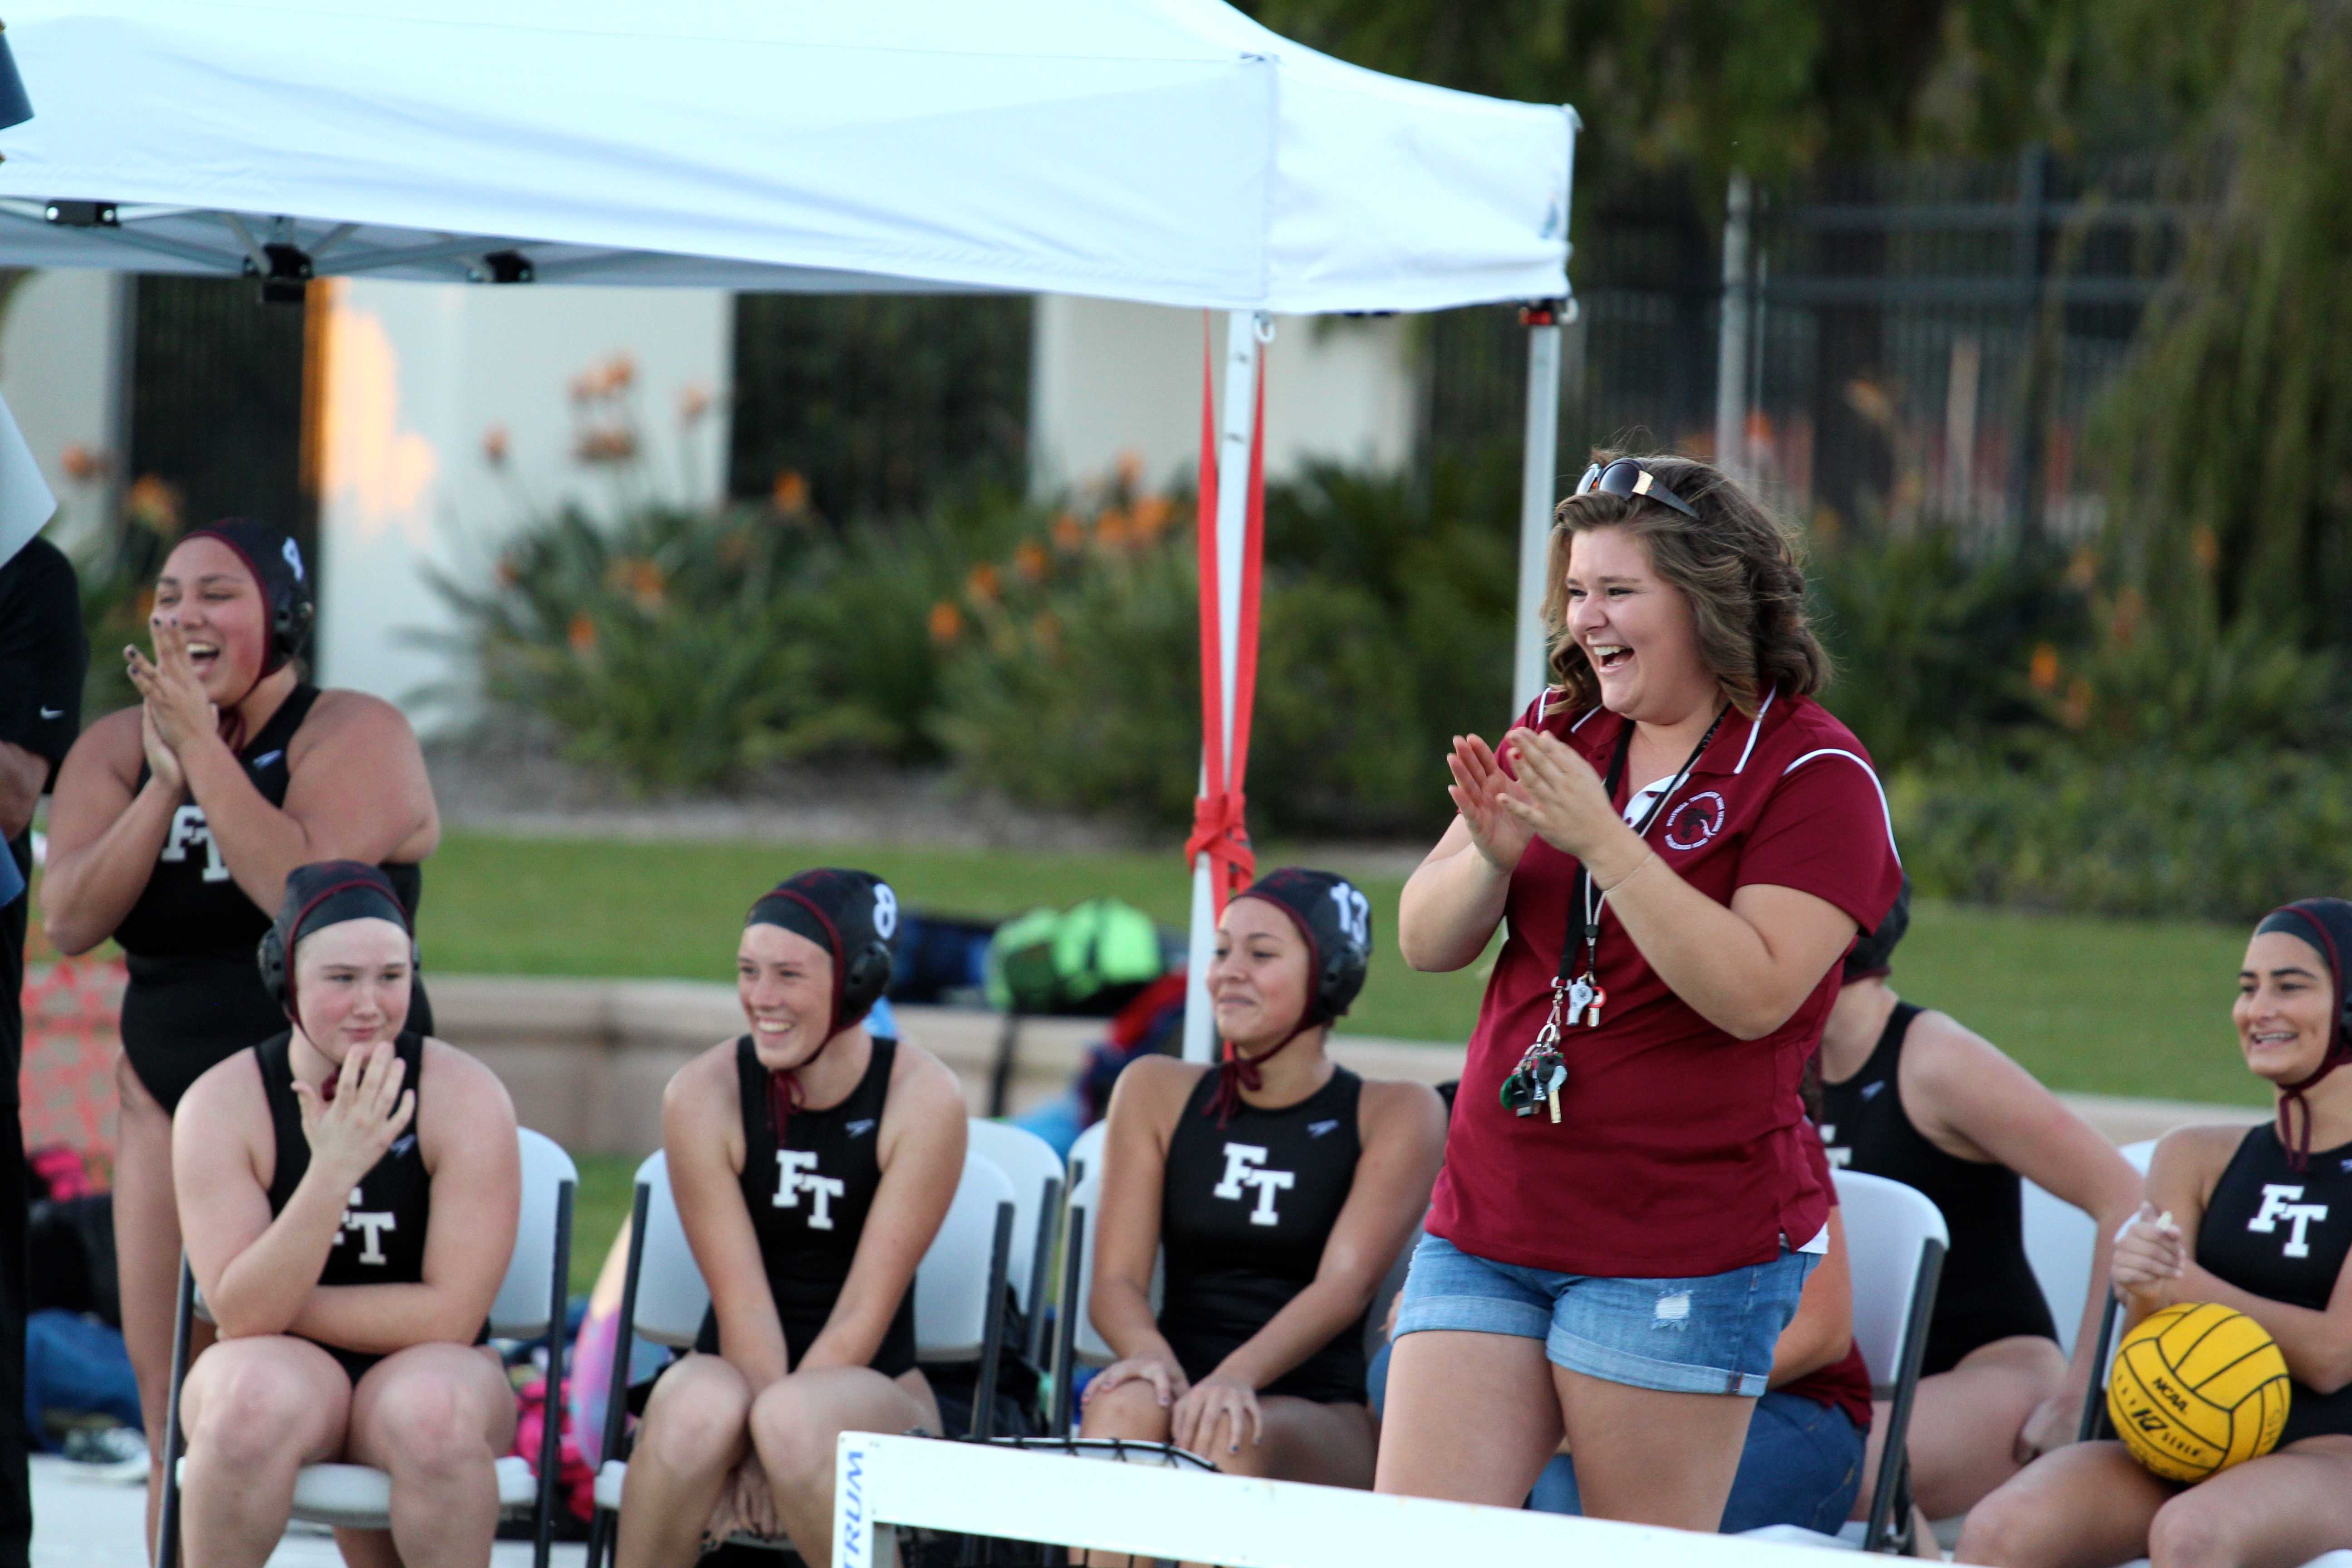 Samantha Ebberson (standing) applauds with Foothill Technology's inaugural girl's water polo team. Credit: Kazu Koba/The Foothill Dragon Press